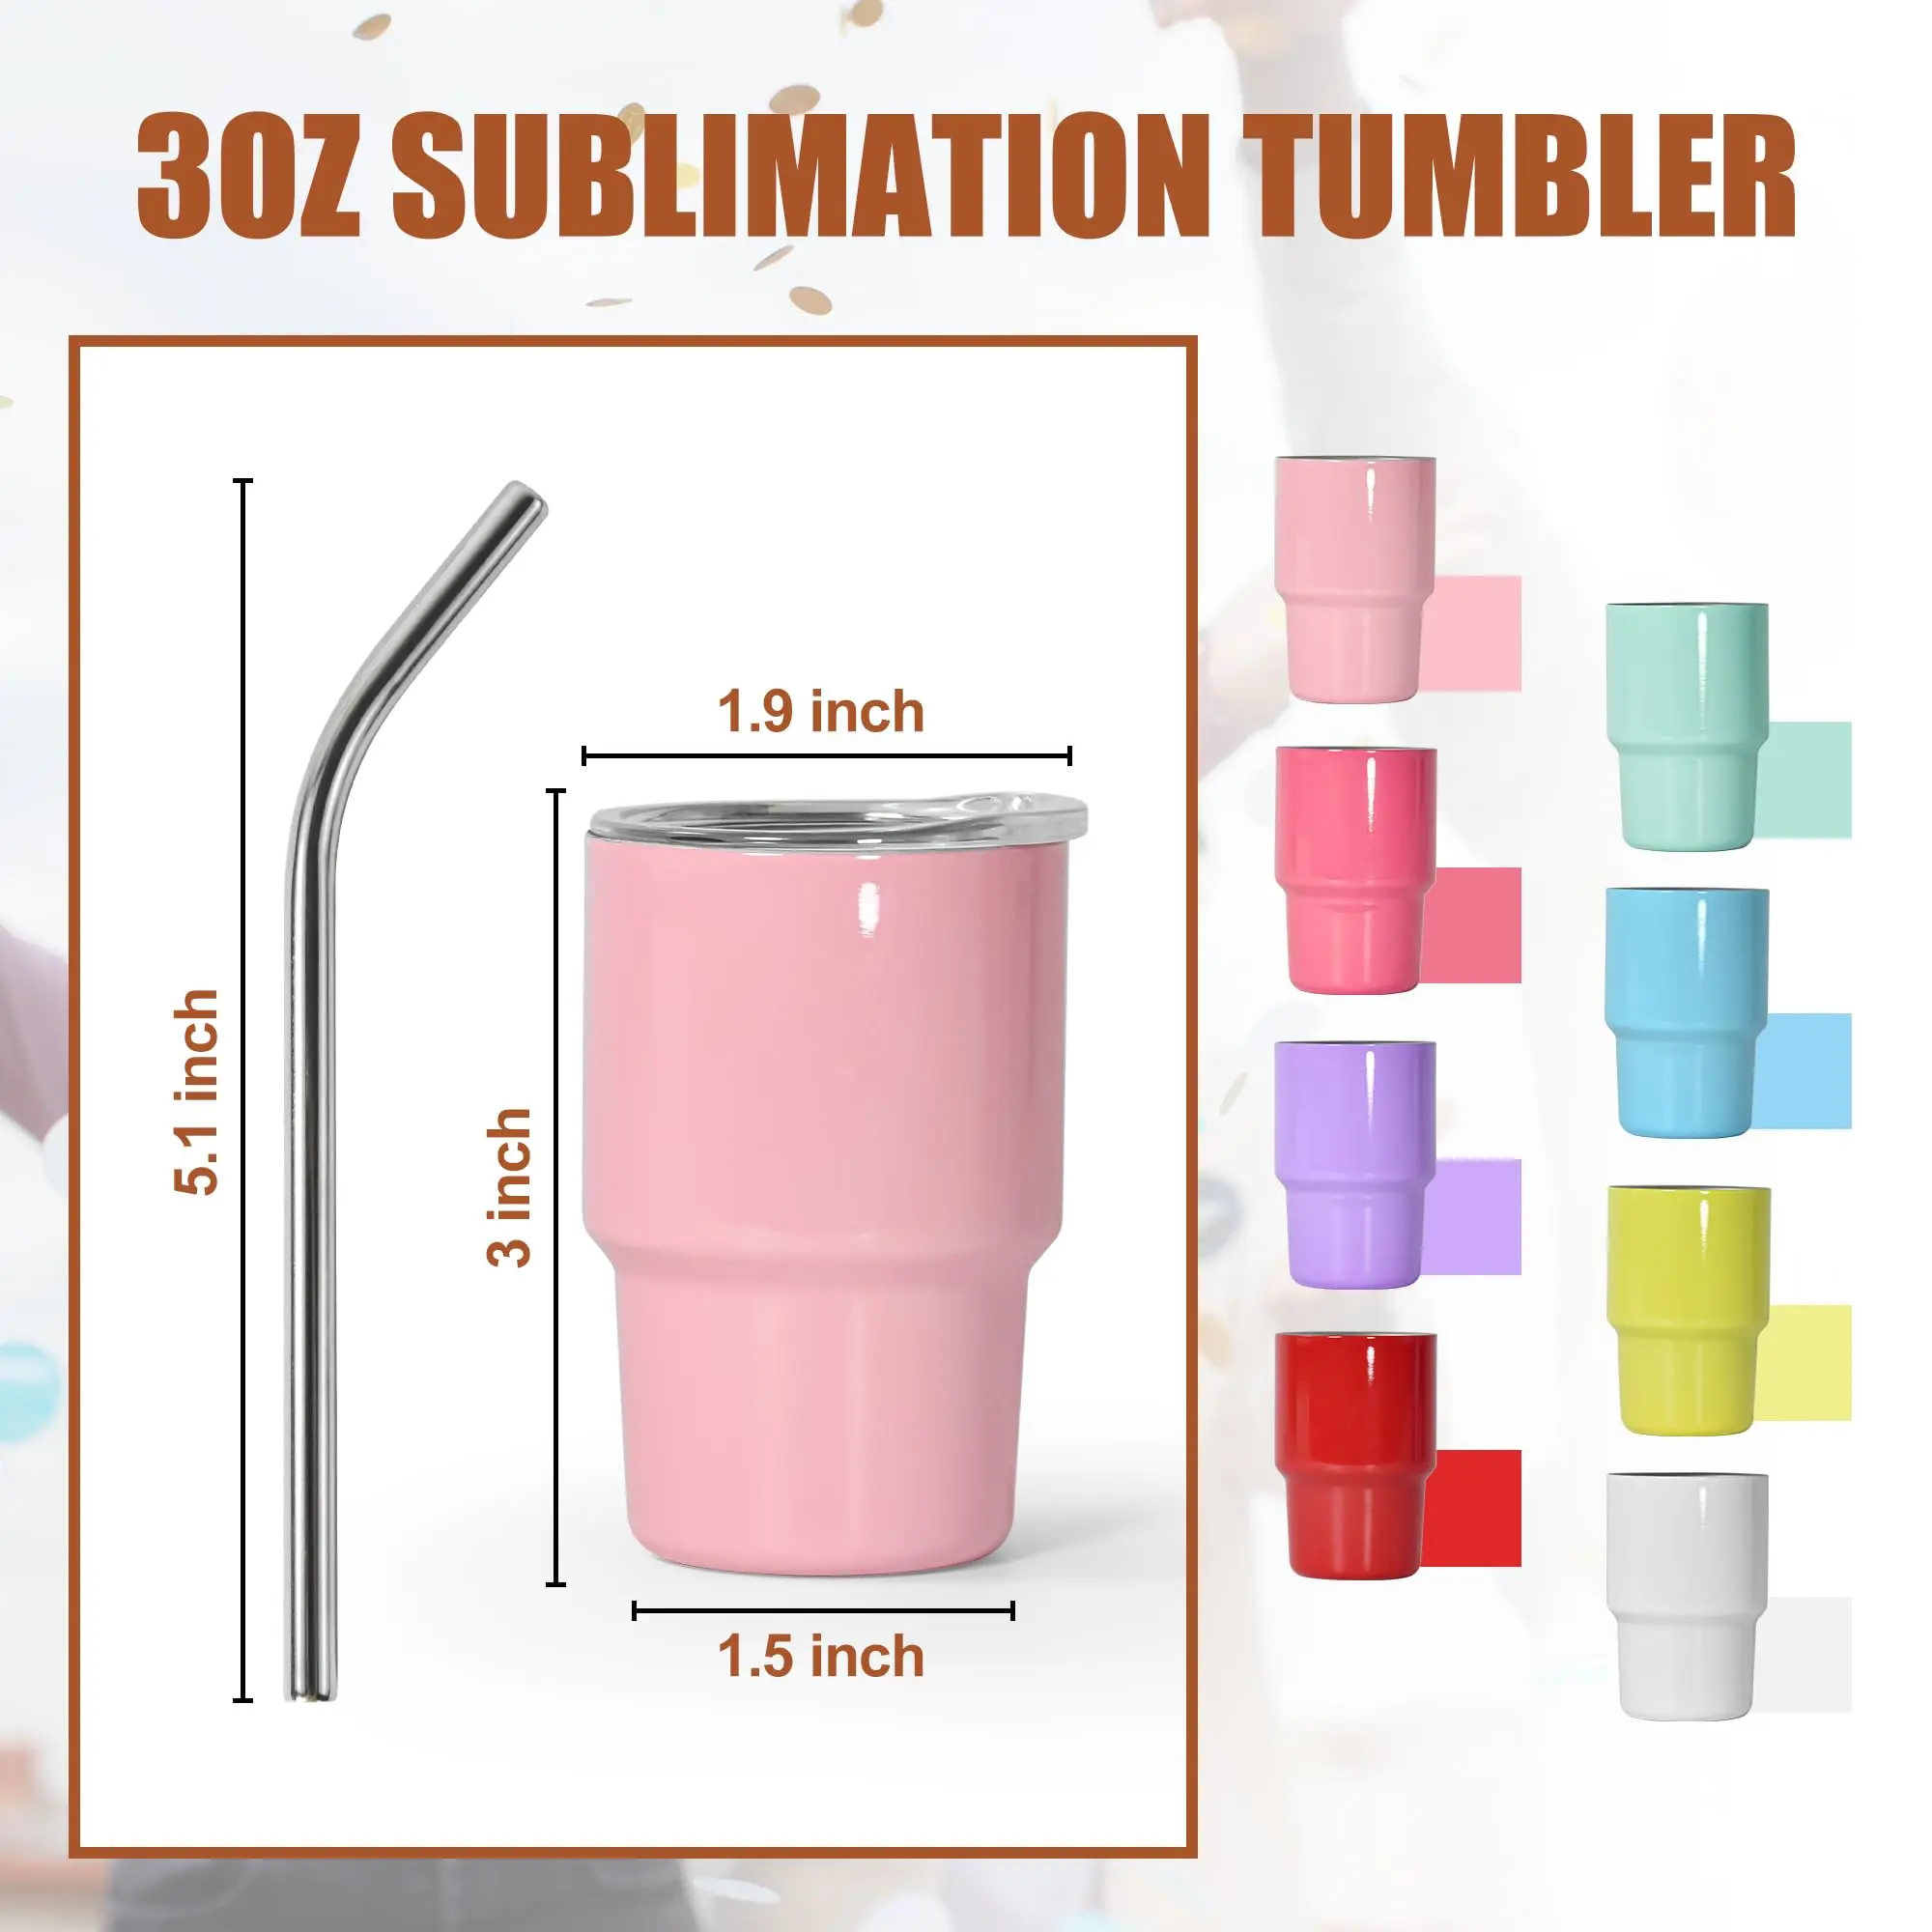 3oz stainless steel colored tumbler shotglass with metal straw 3oz sublimation tumbler shotglass mini cup